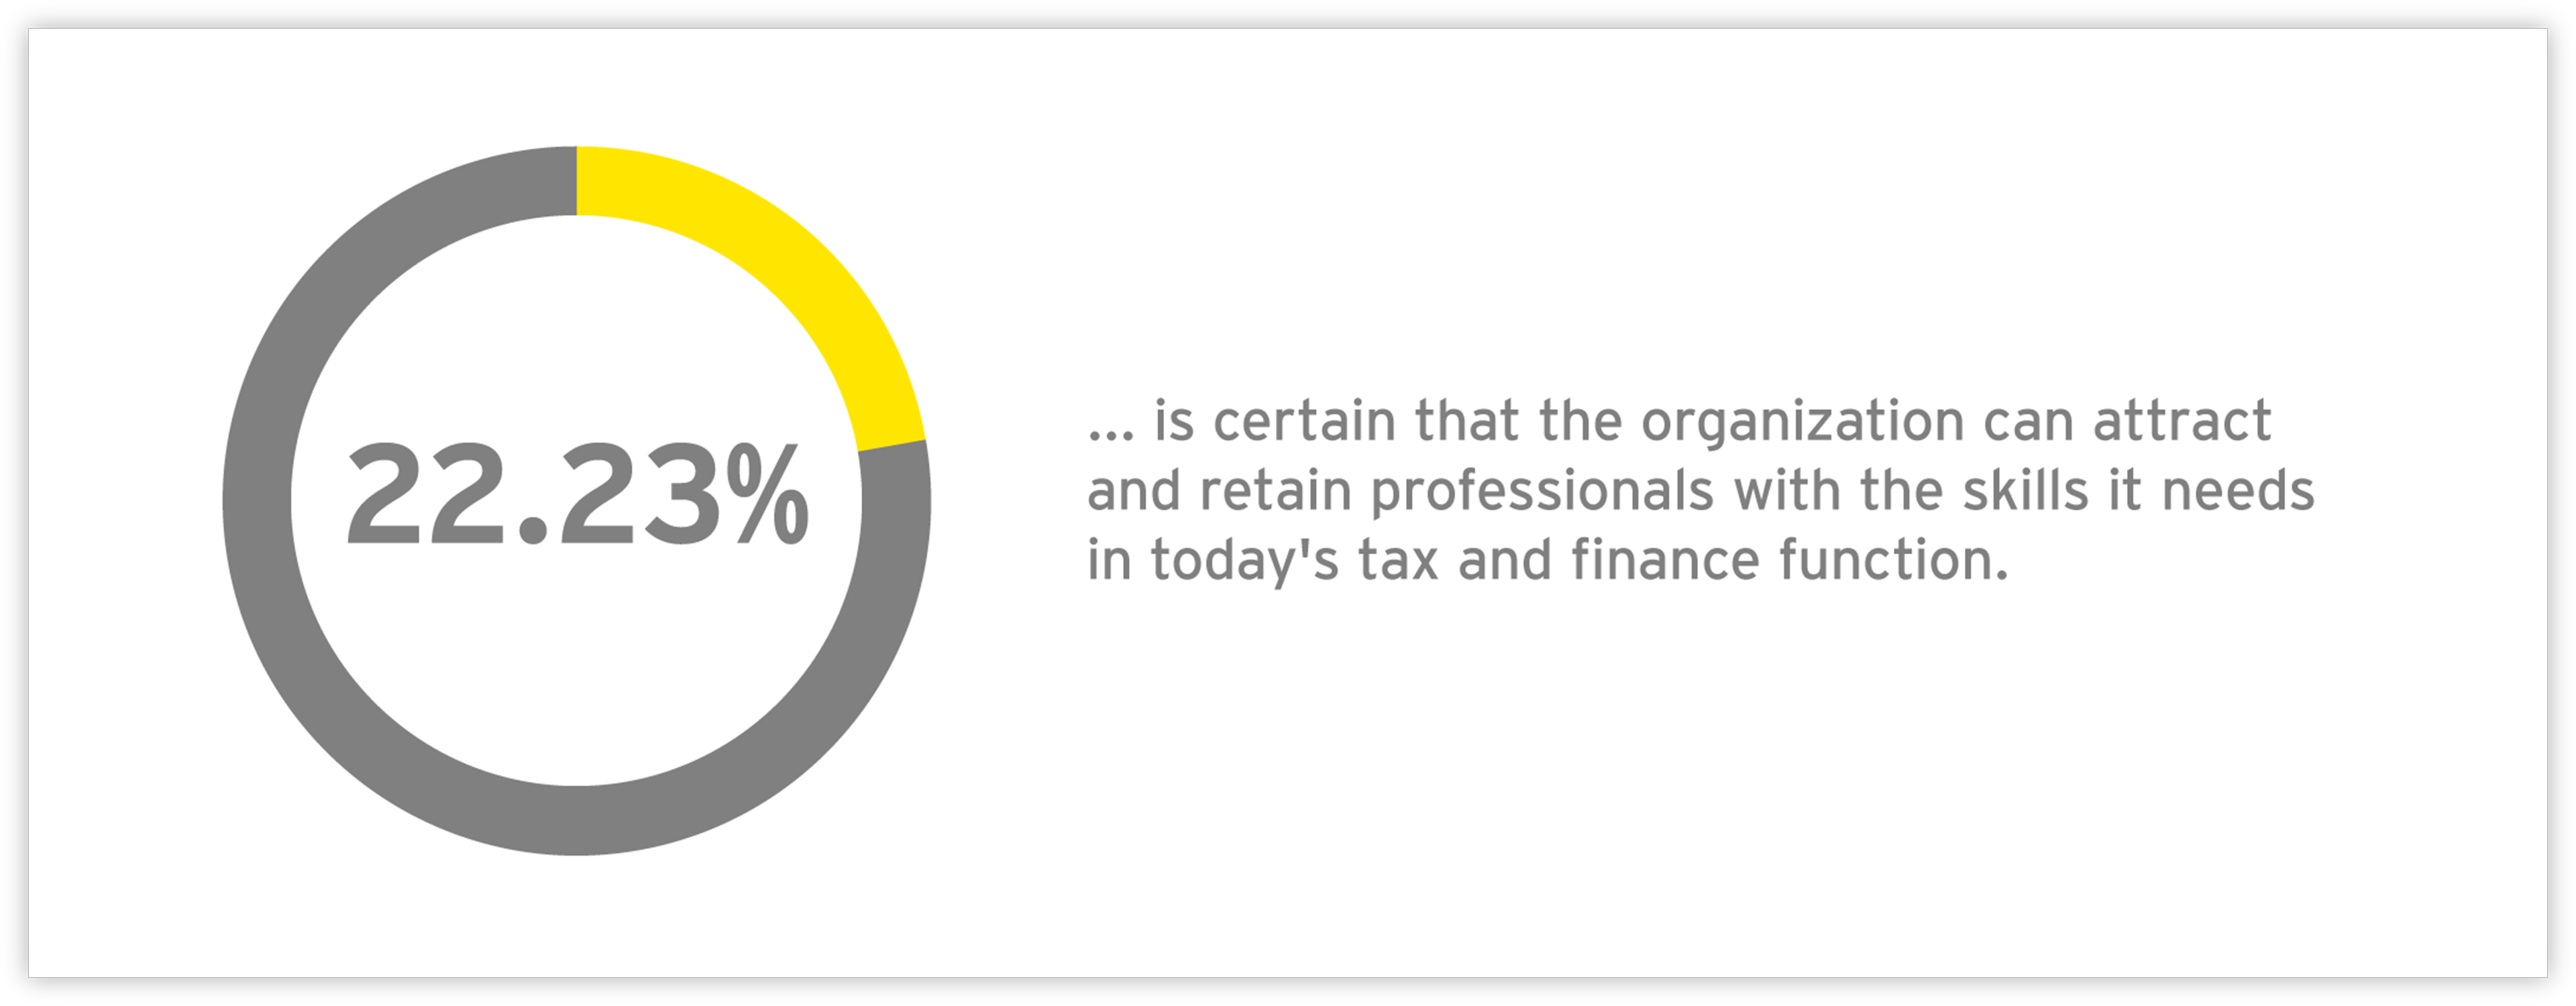 Graph: 22.23% is certain that the organization can attract and retain professionals with the skills it needs in today’s tax and finance function.